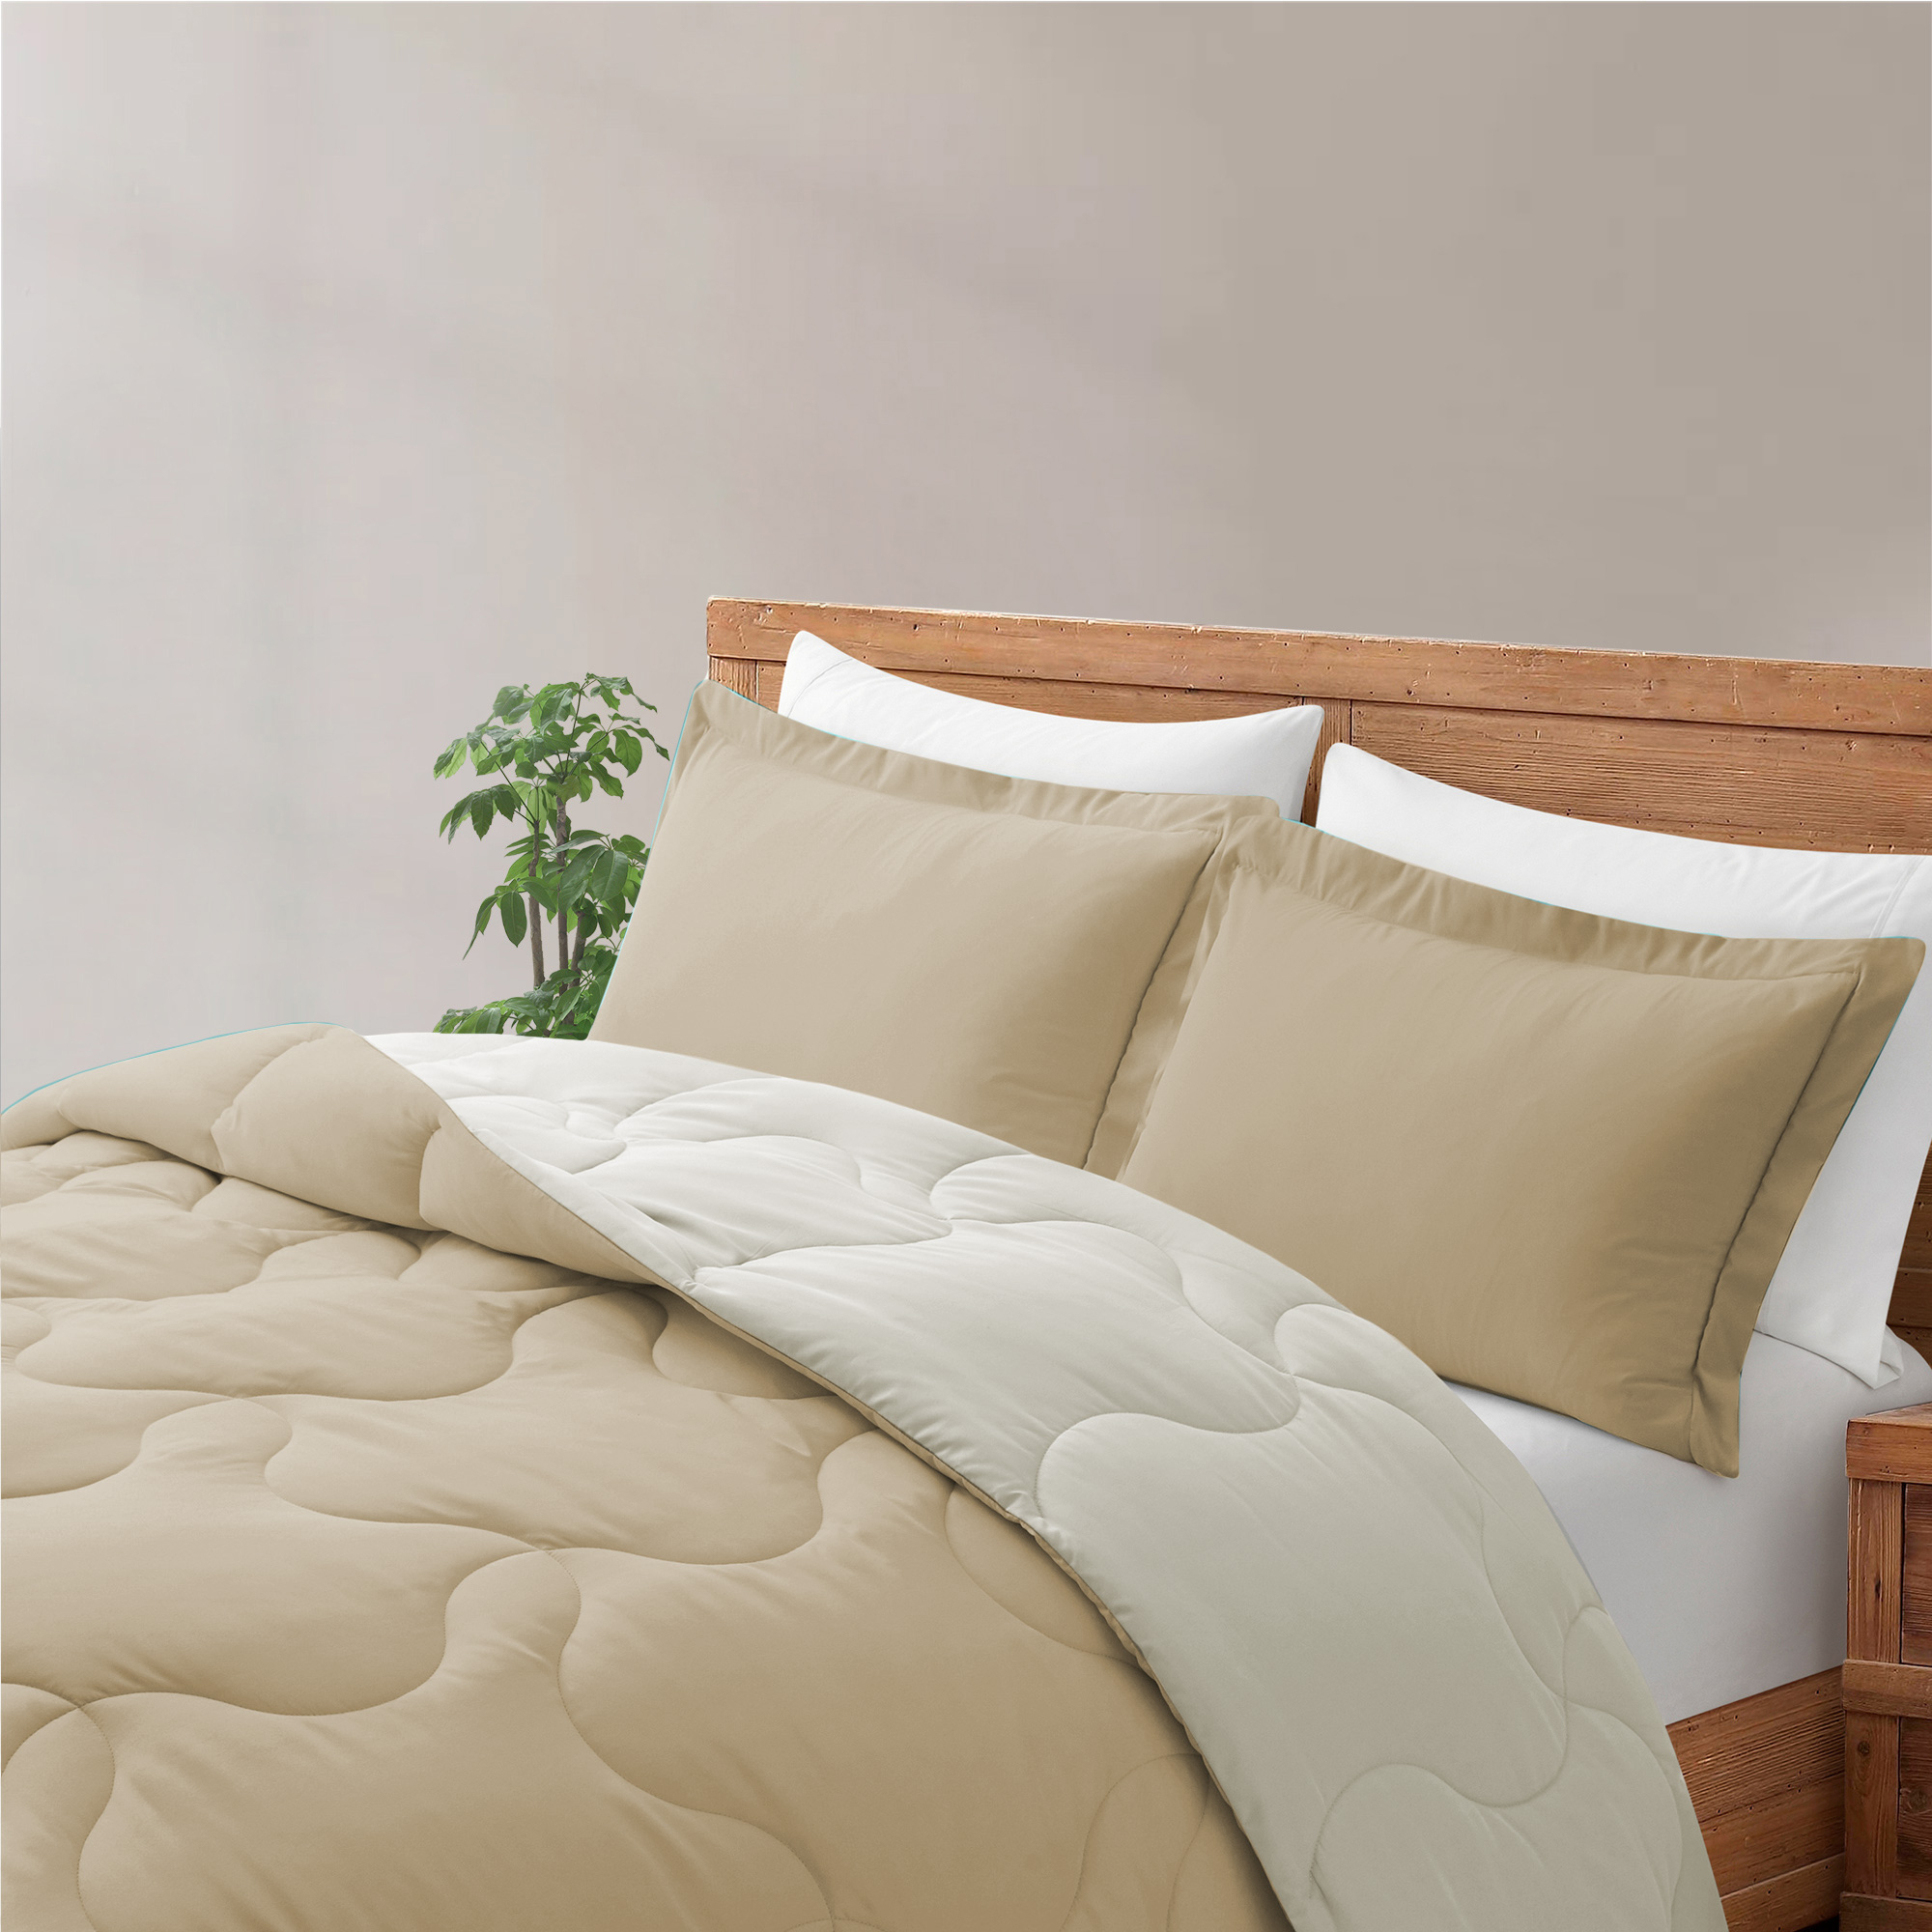 Luxury Reversible Down Alternative Machine Washable Comforter Set With Shams - Full/Queen Size